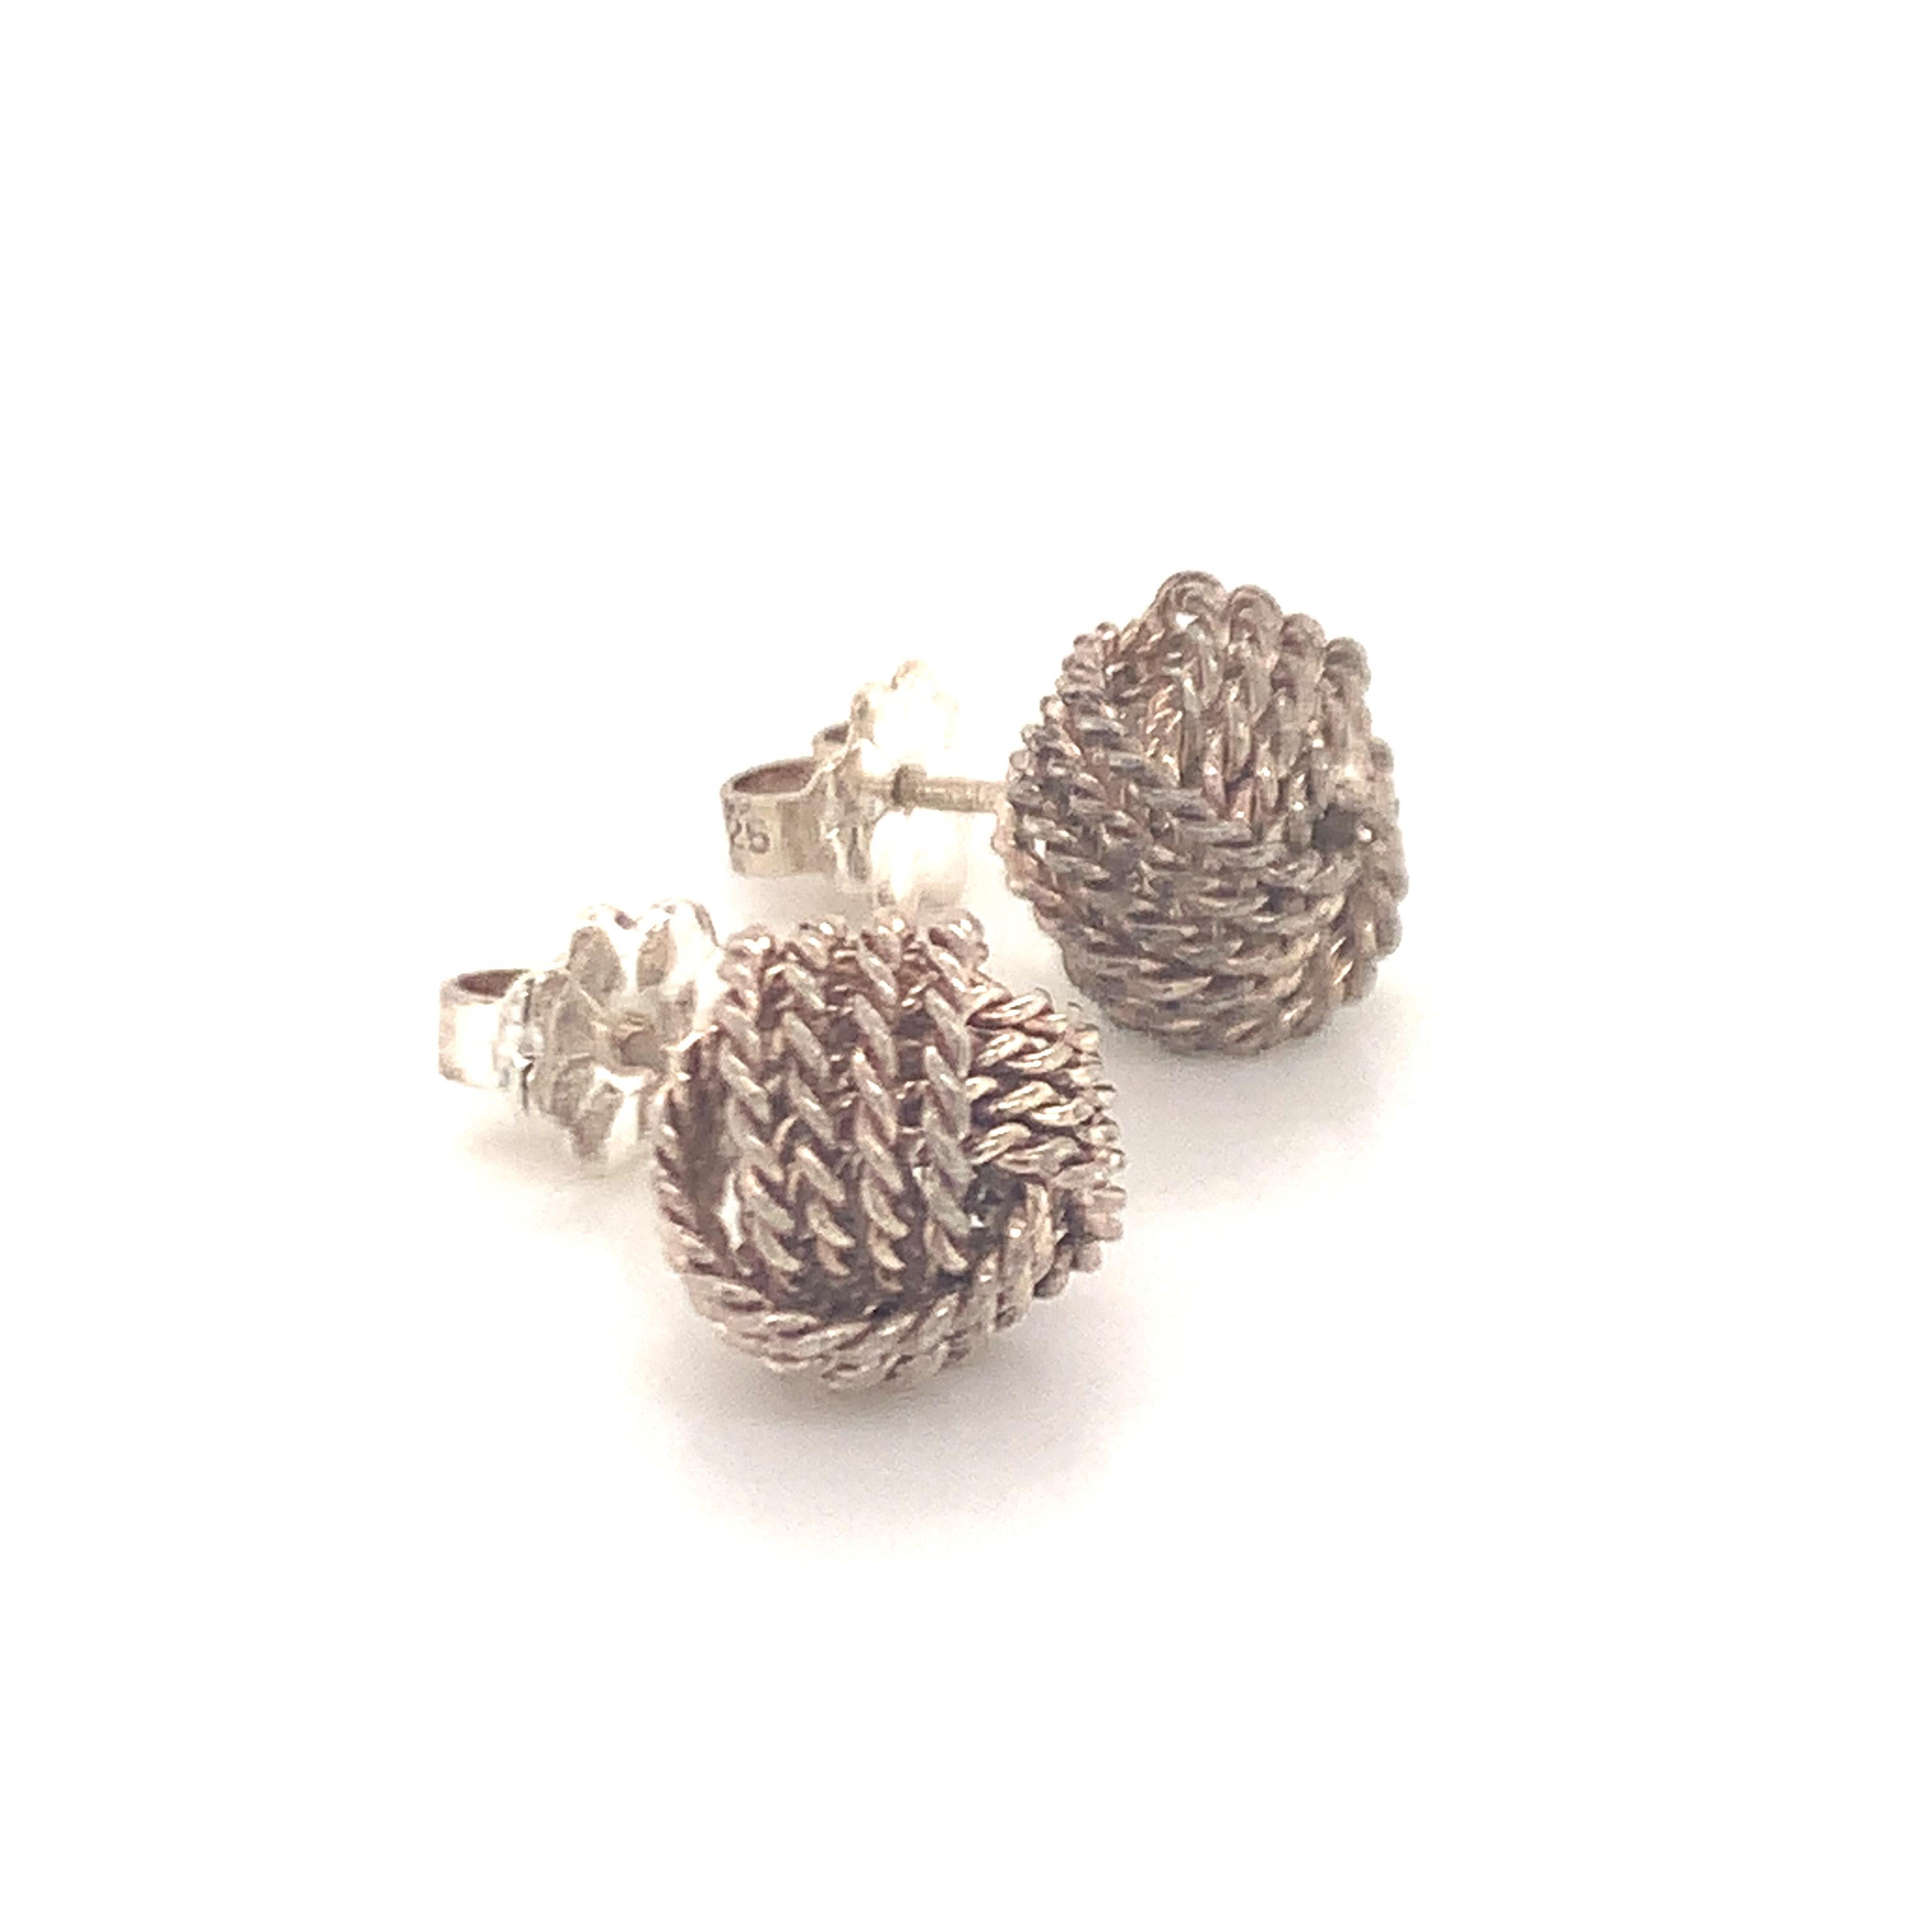 Tiffany & Co Estate Love Knot Earrings Sterling Silver TIF532

These elegant Authentic Tiffany & Co Earrings are made of sterling silver and have a weight of 5.5 grams.

TRUSTED SELLER SINCE 2002

PLEASE SEE OUR HUNDREDS OF POSITIVE FEEDBACKS FROM